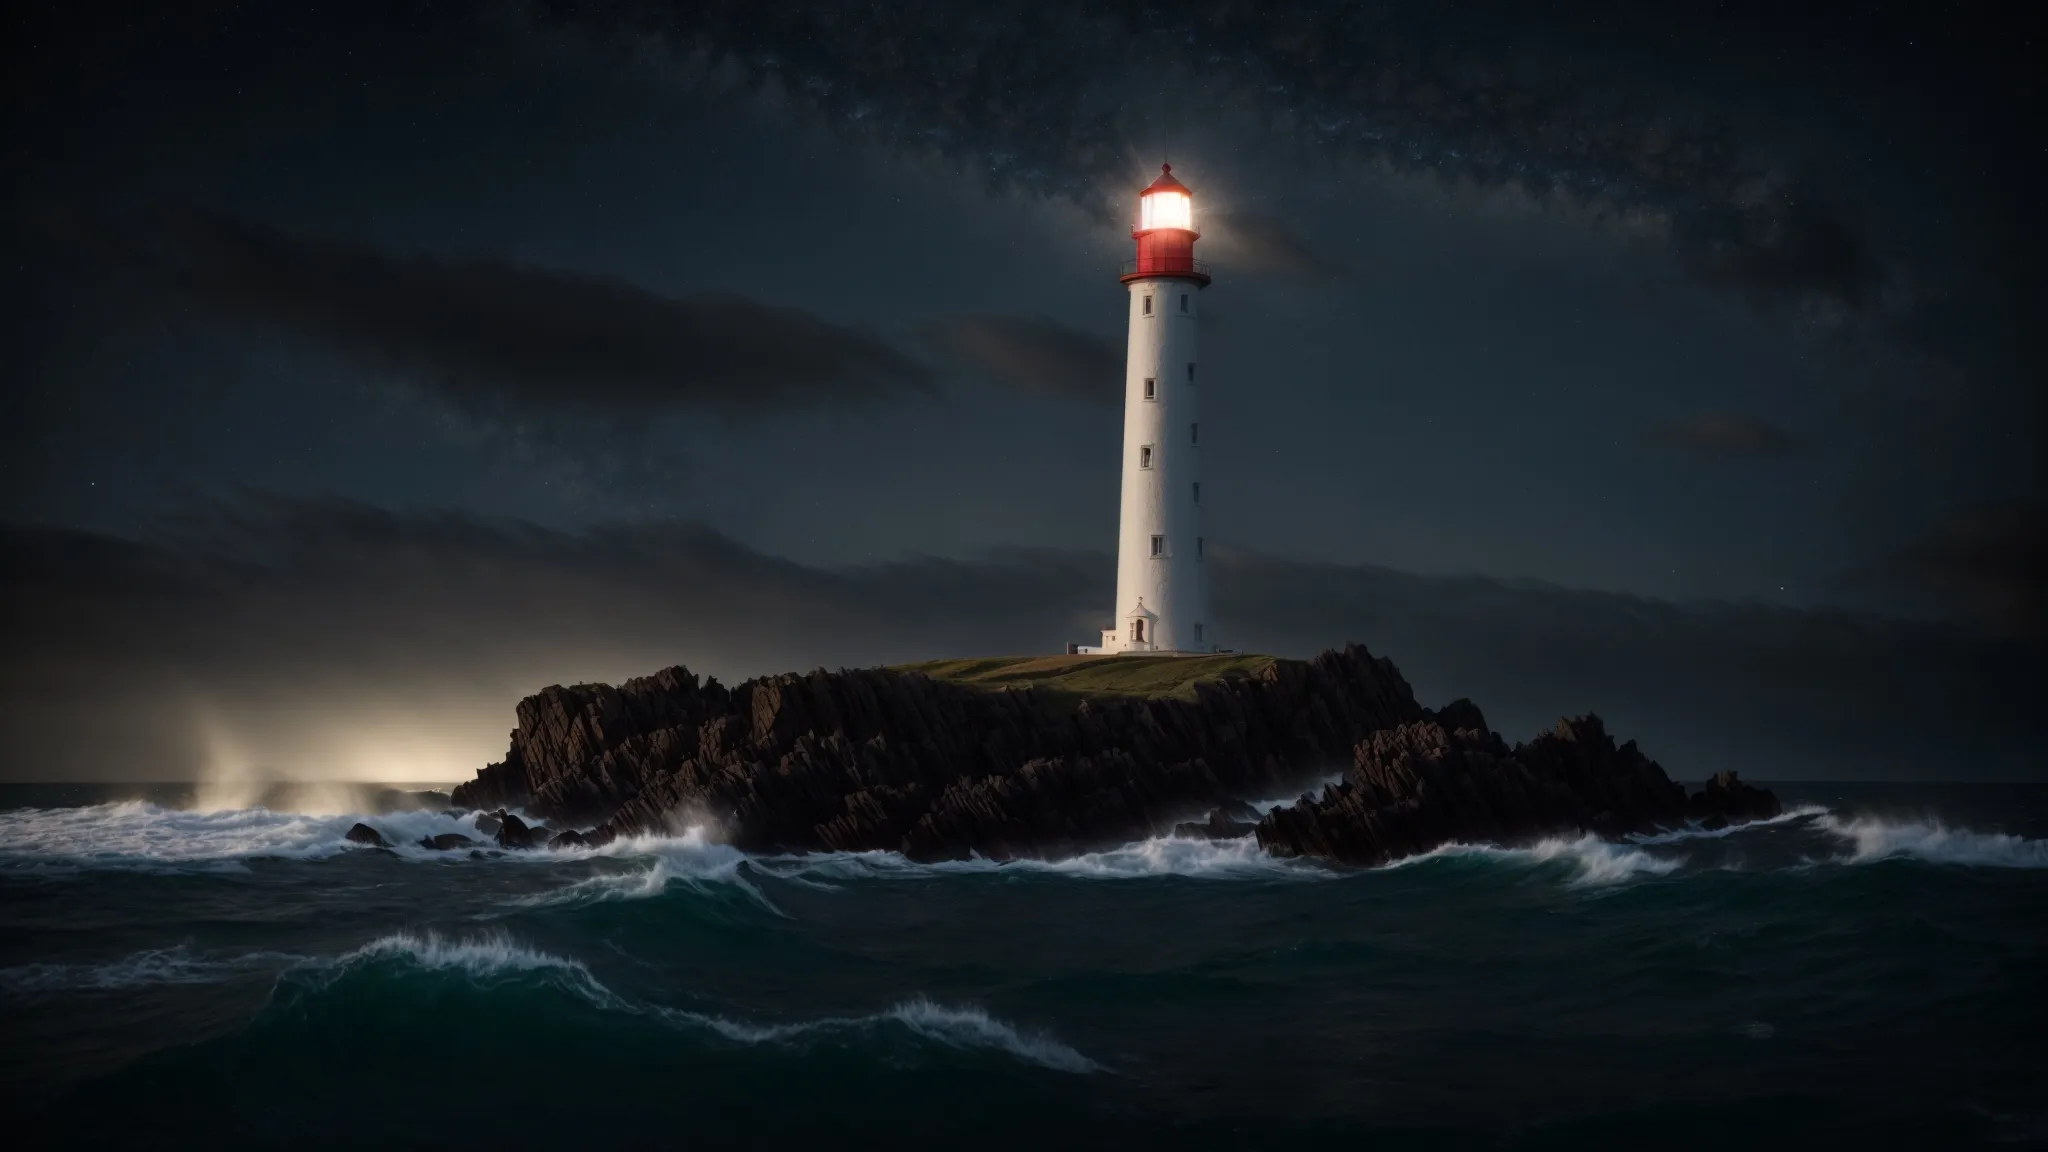 a lighthouse stands tall on a rocky shoreline, casting a beam of light across a dark, tumultuous sea under a starry sky.